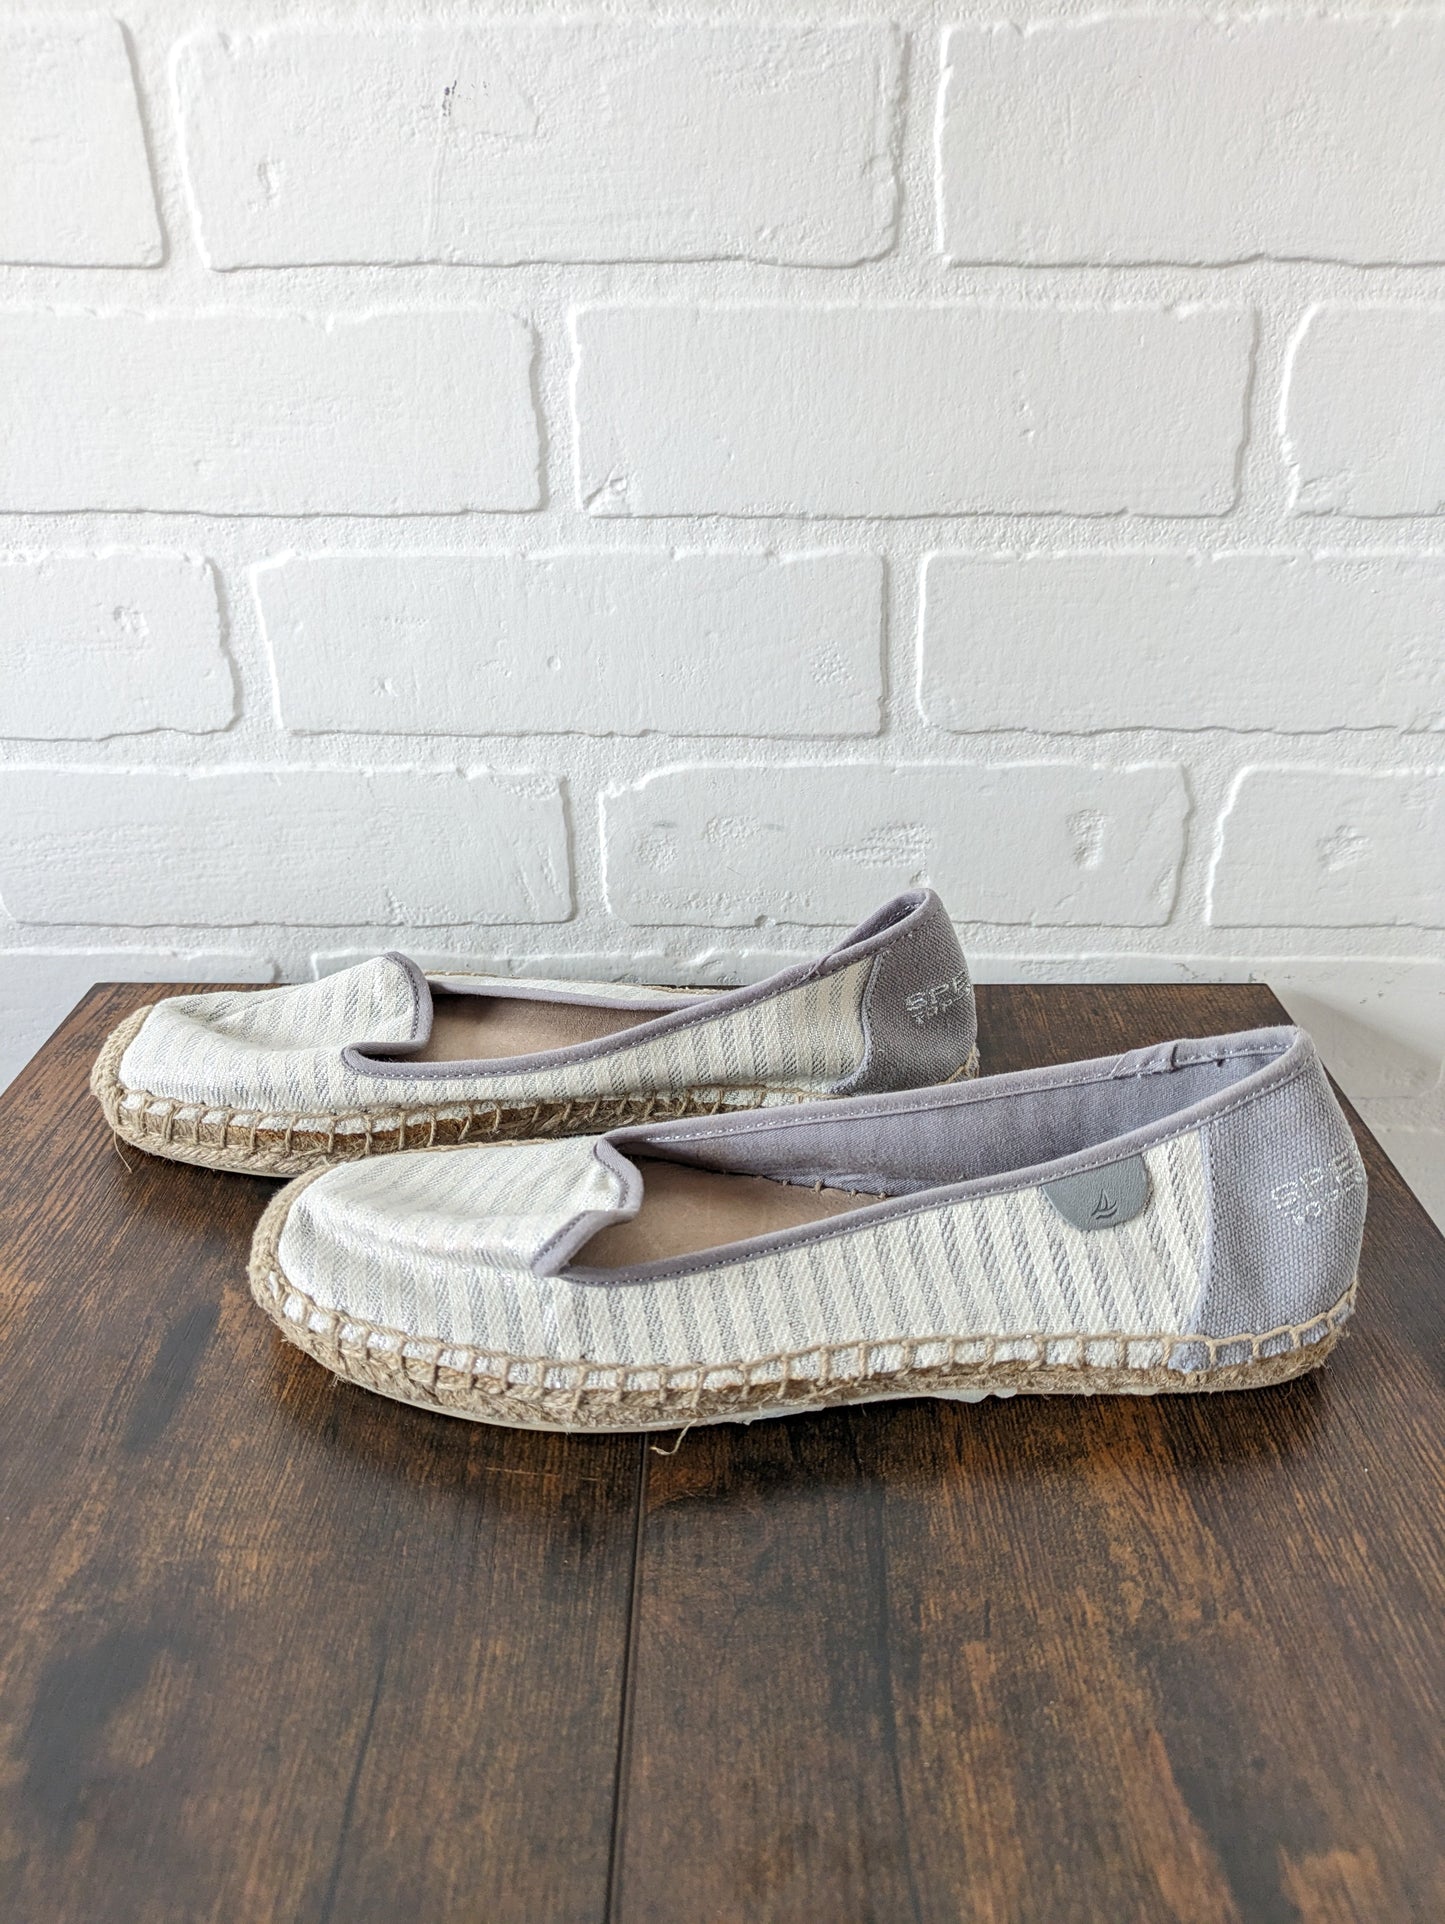 Shoes Flats Espadrille By Sperry  Size: 7